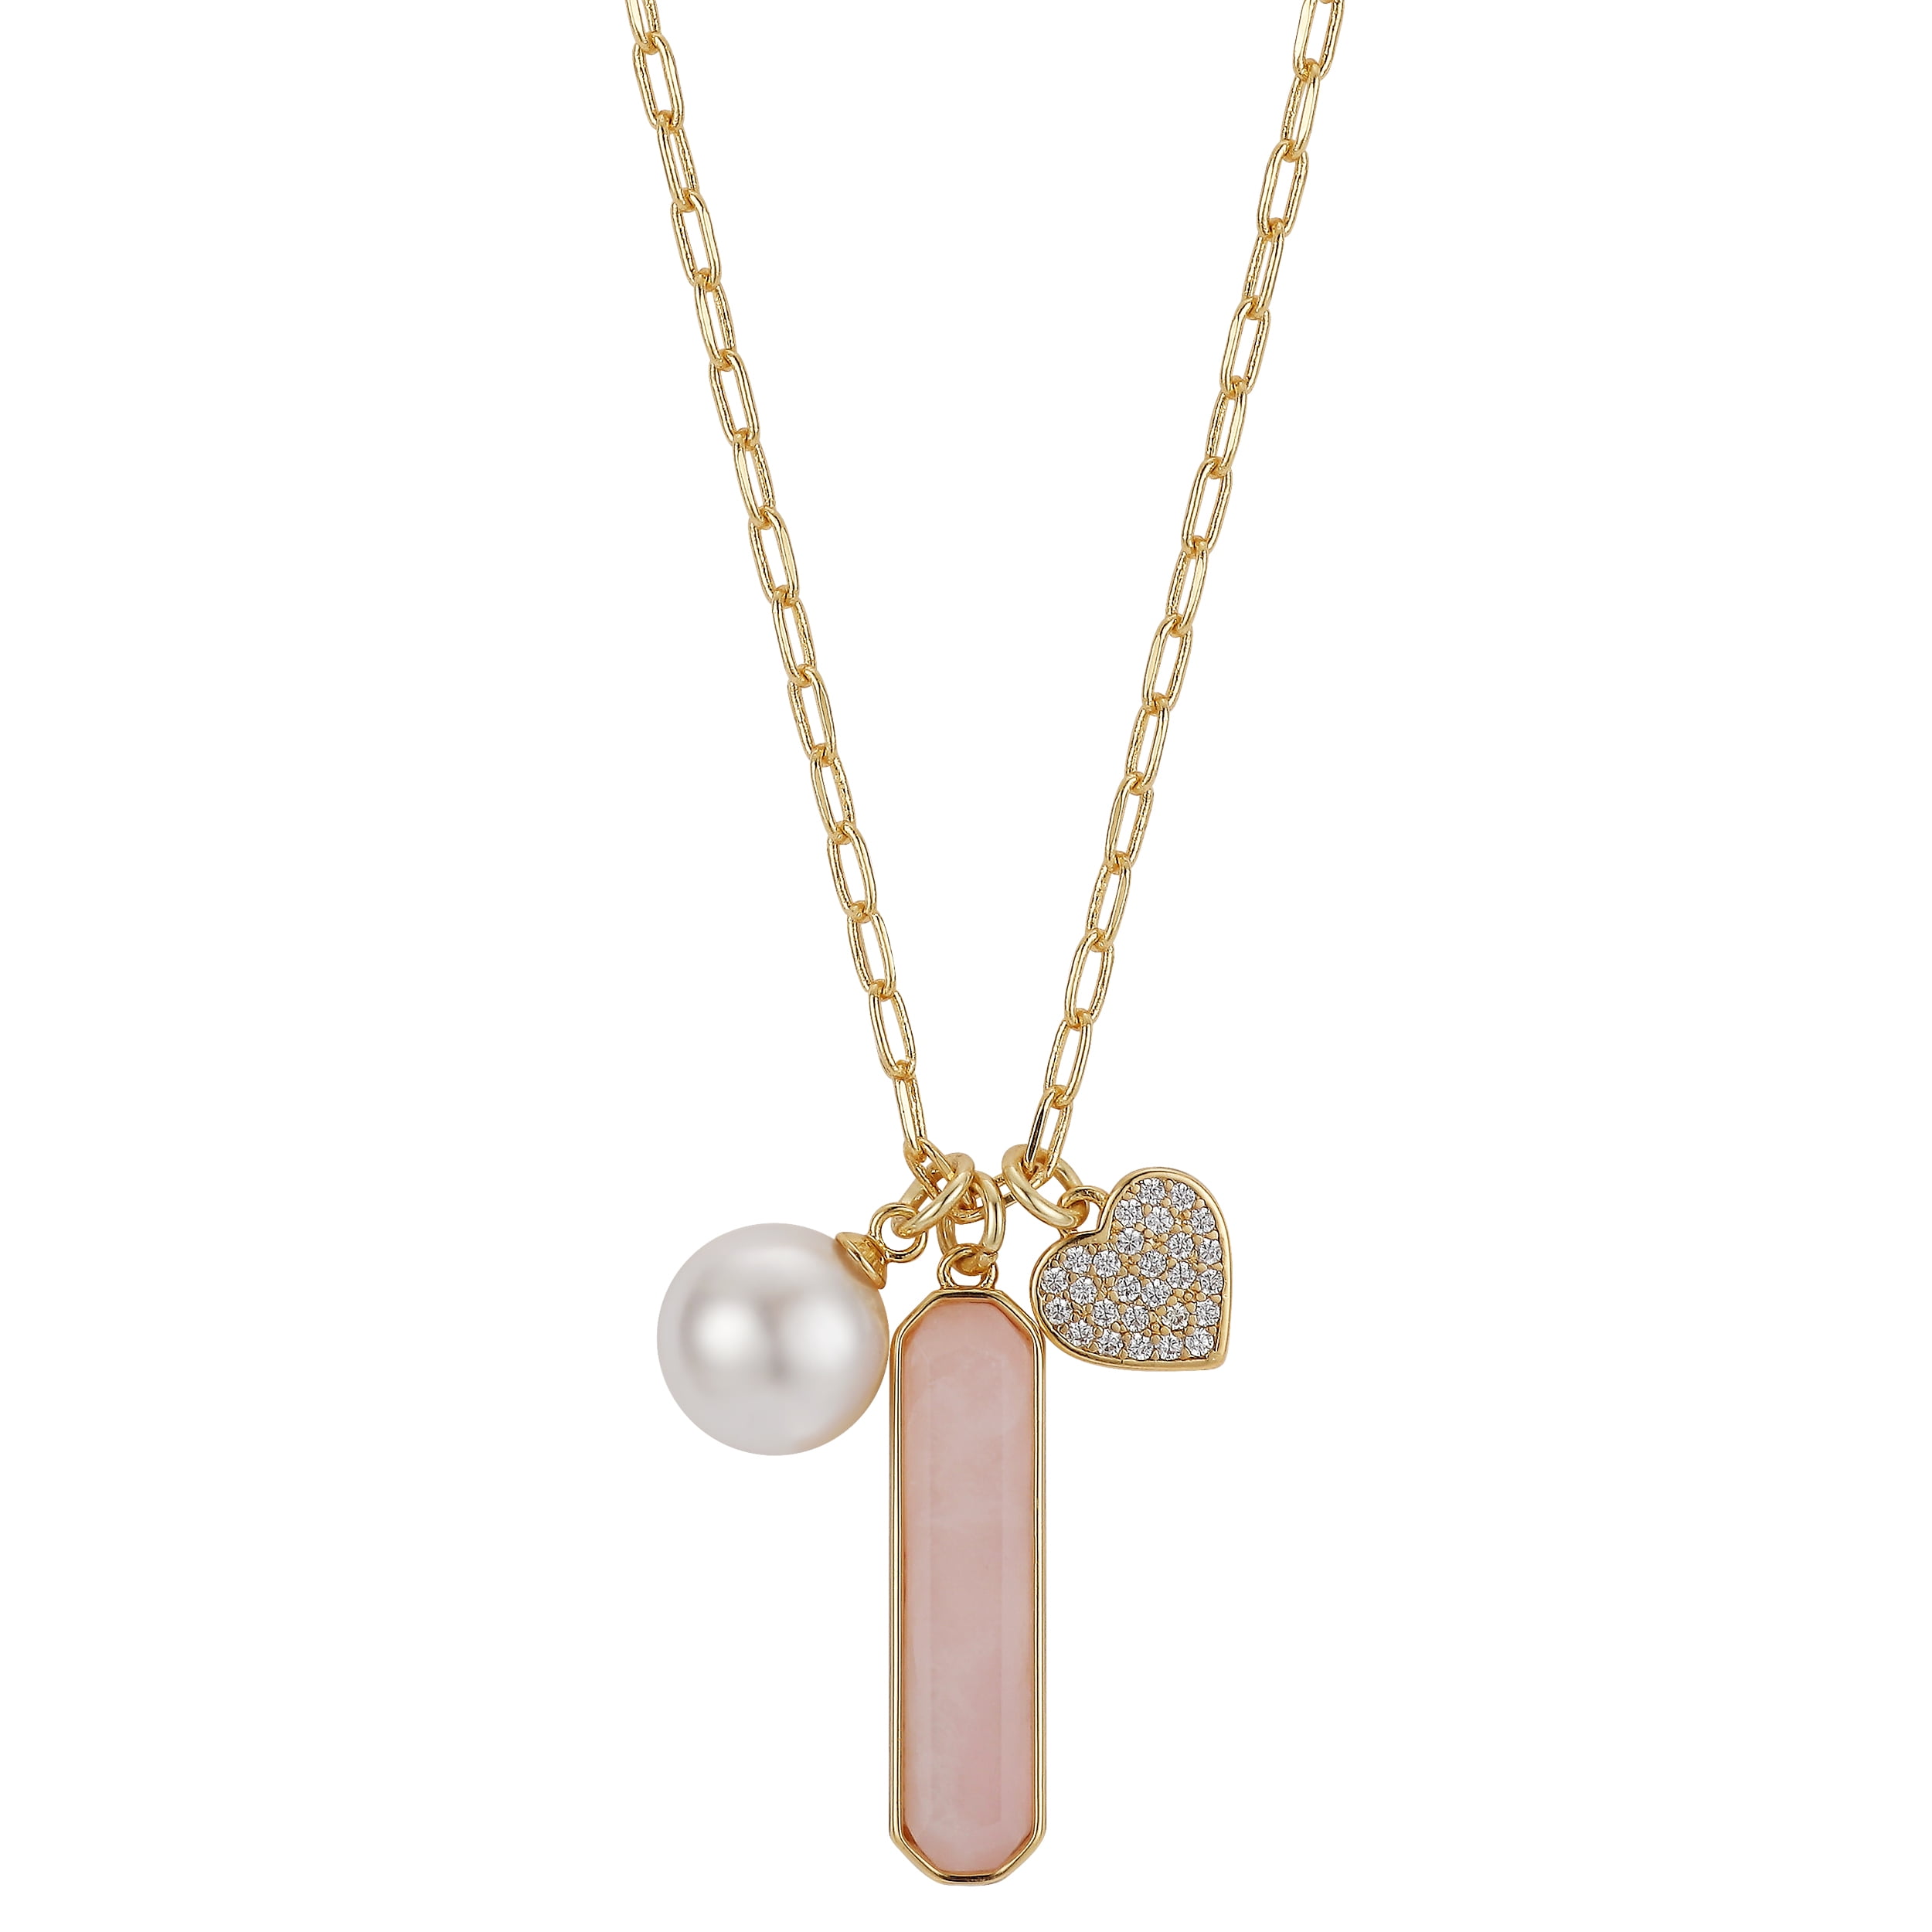 14kt Gold Flash-Plated Genuine Rose Quartz Stone and Crystal Heart Pendant Necklace, 18" + 2" Extender